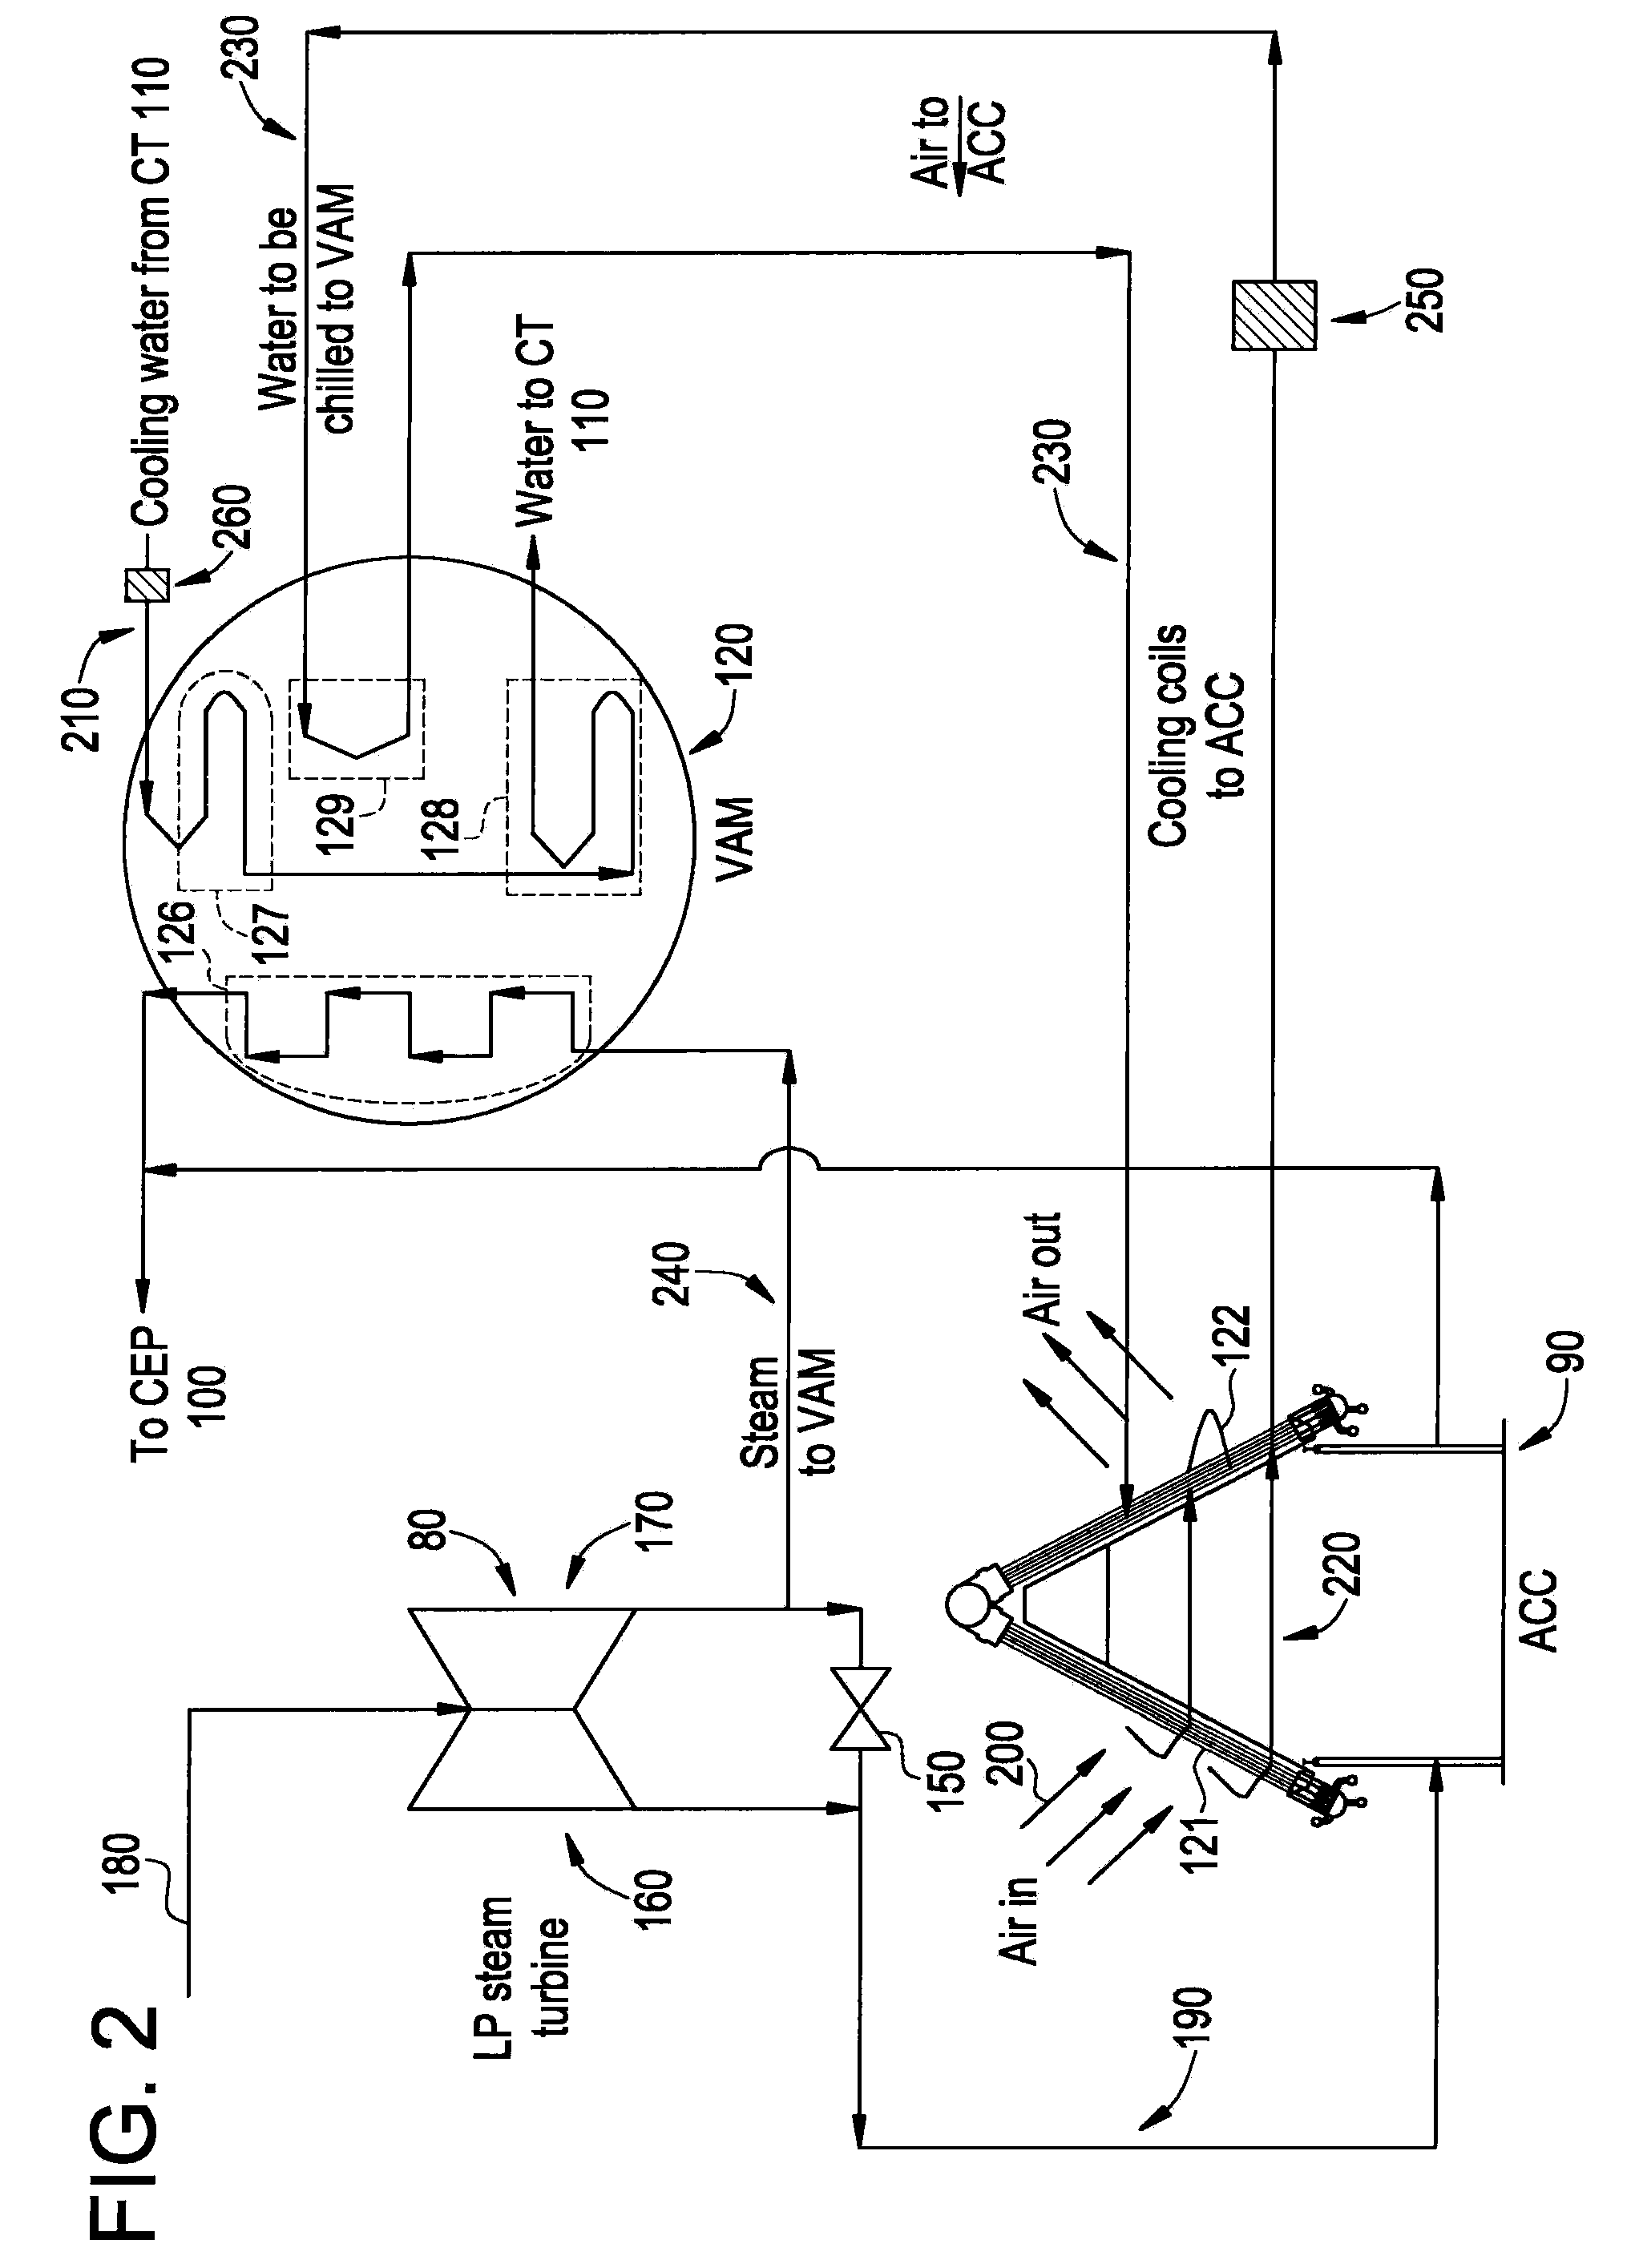 System and method for use in a combined cycle or rankine cycle power plant using an air-cooled steam condenser